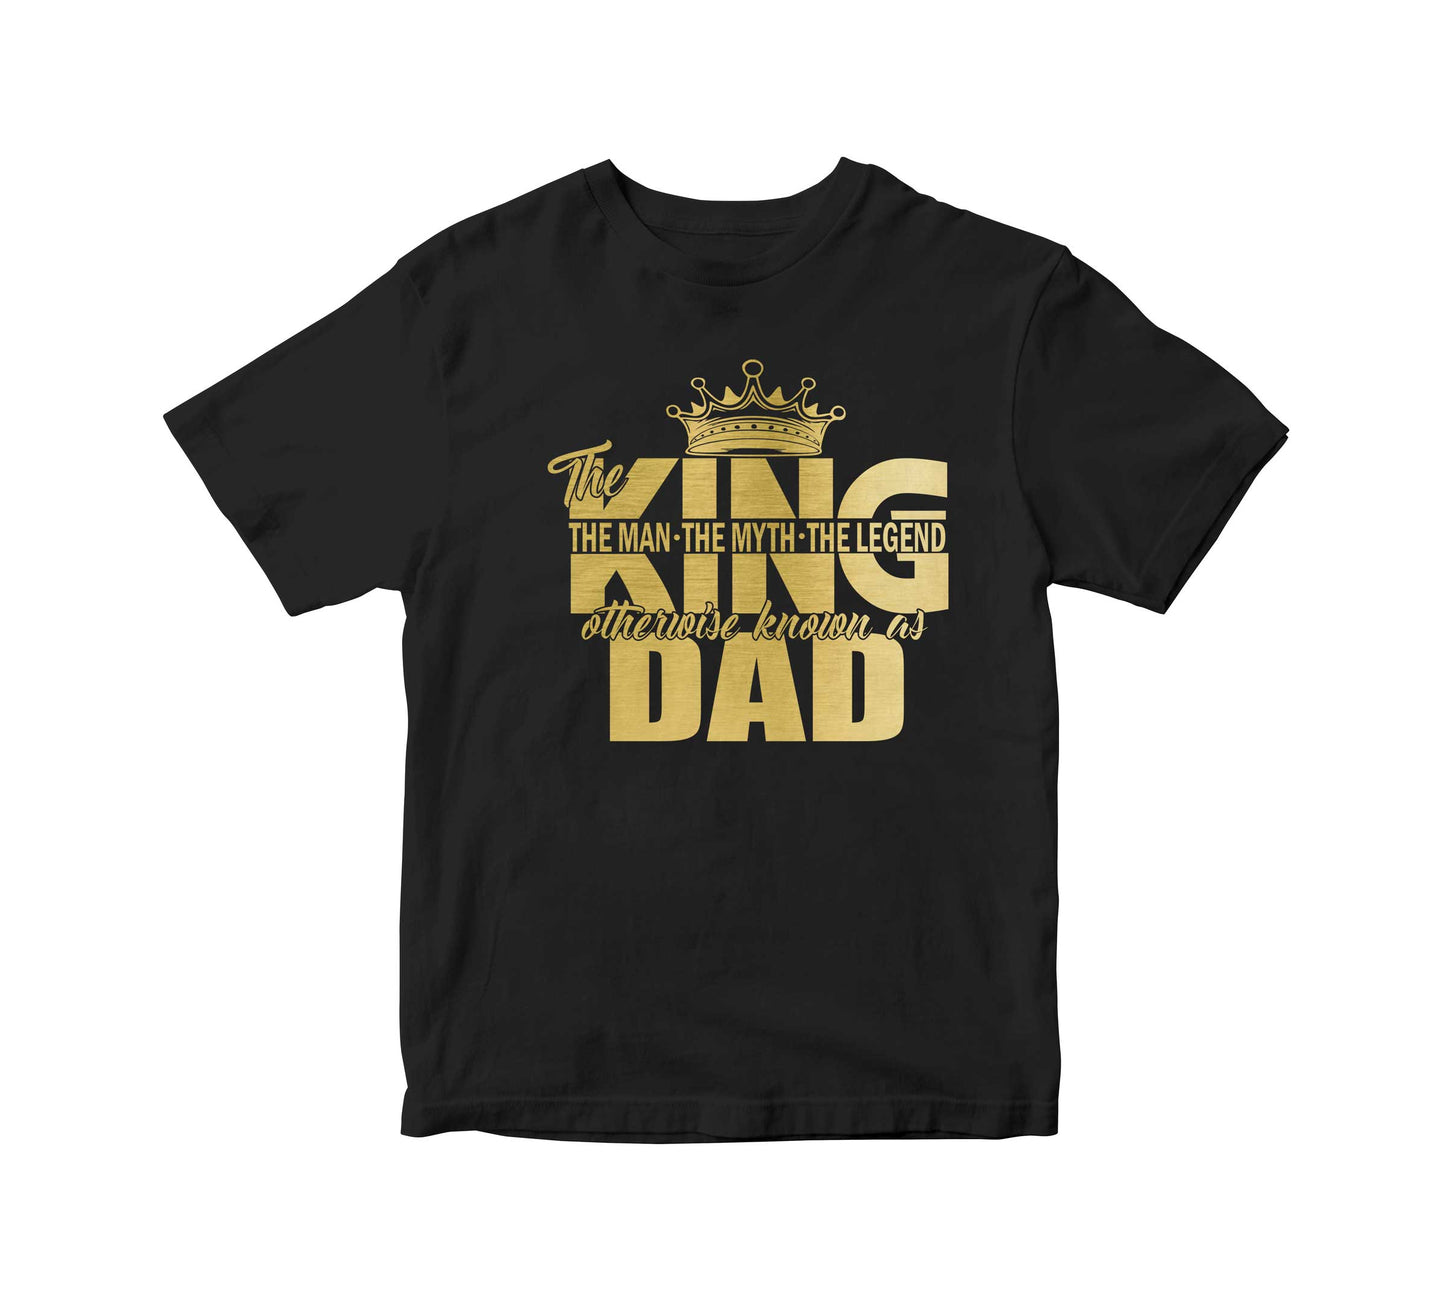 The King Dad Adult Unisex T-Shirt